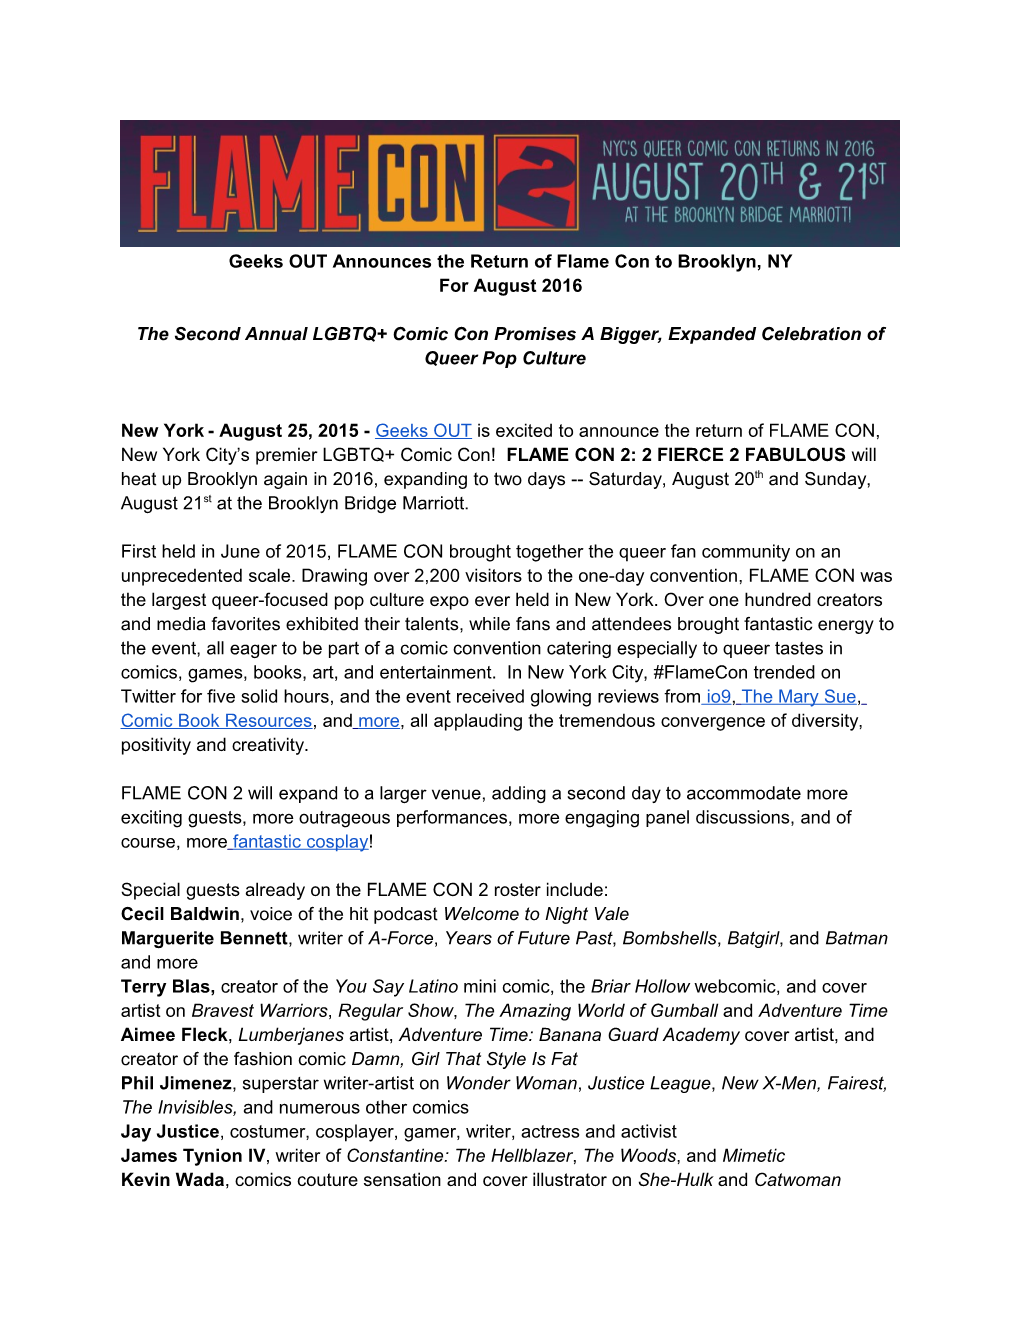 Geeks out Announces the Return of Flame Con to Brooklyn, NY